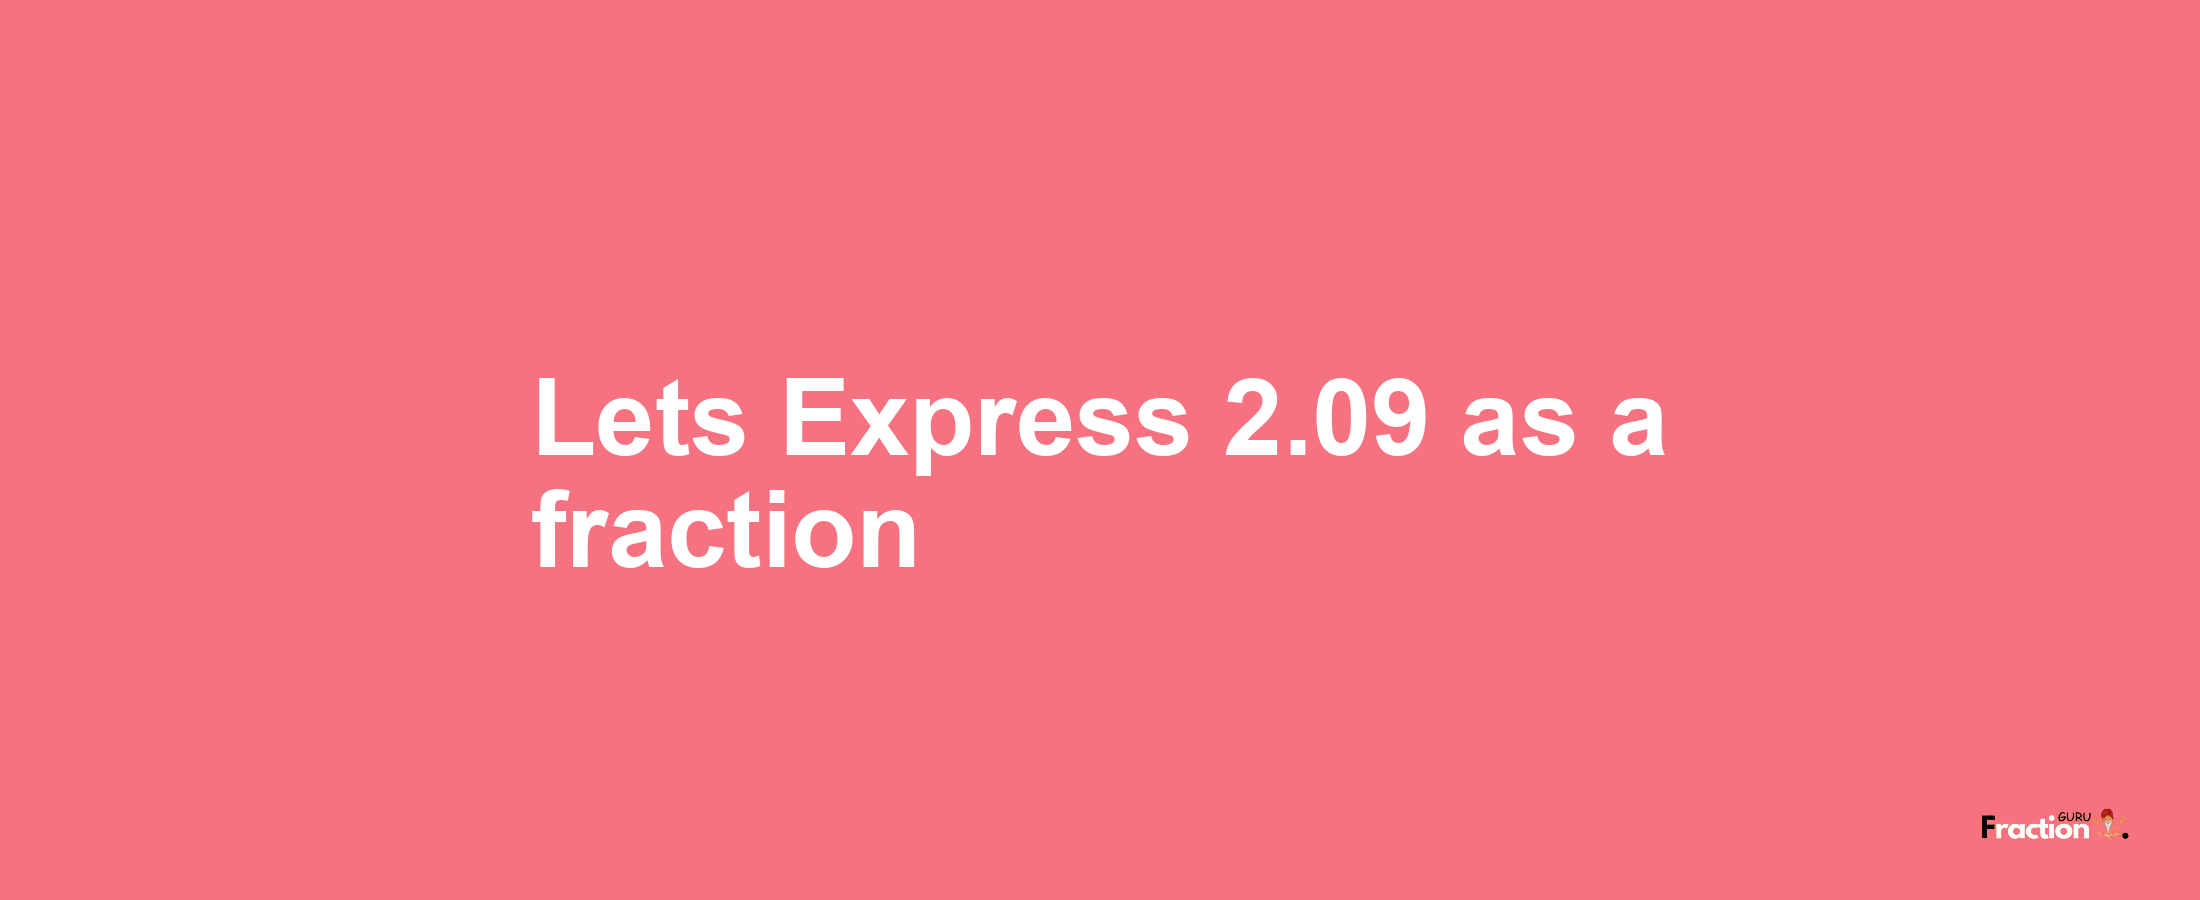 Lets Express 2.09 as afraction